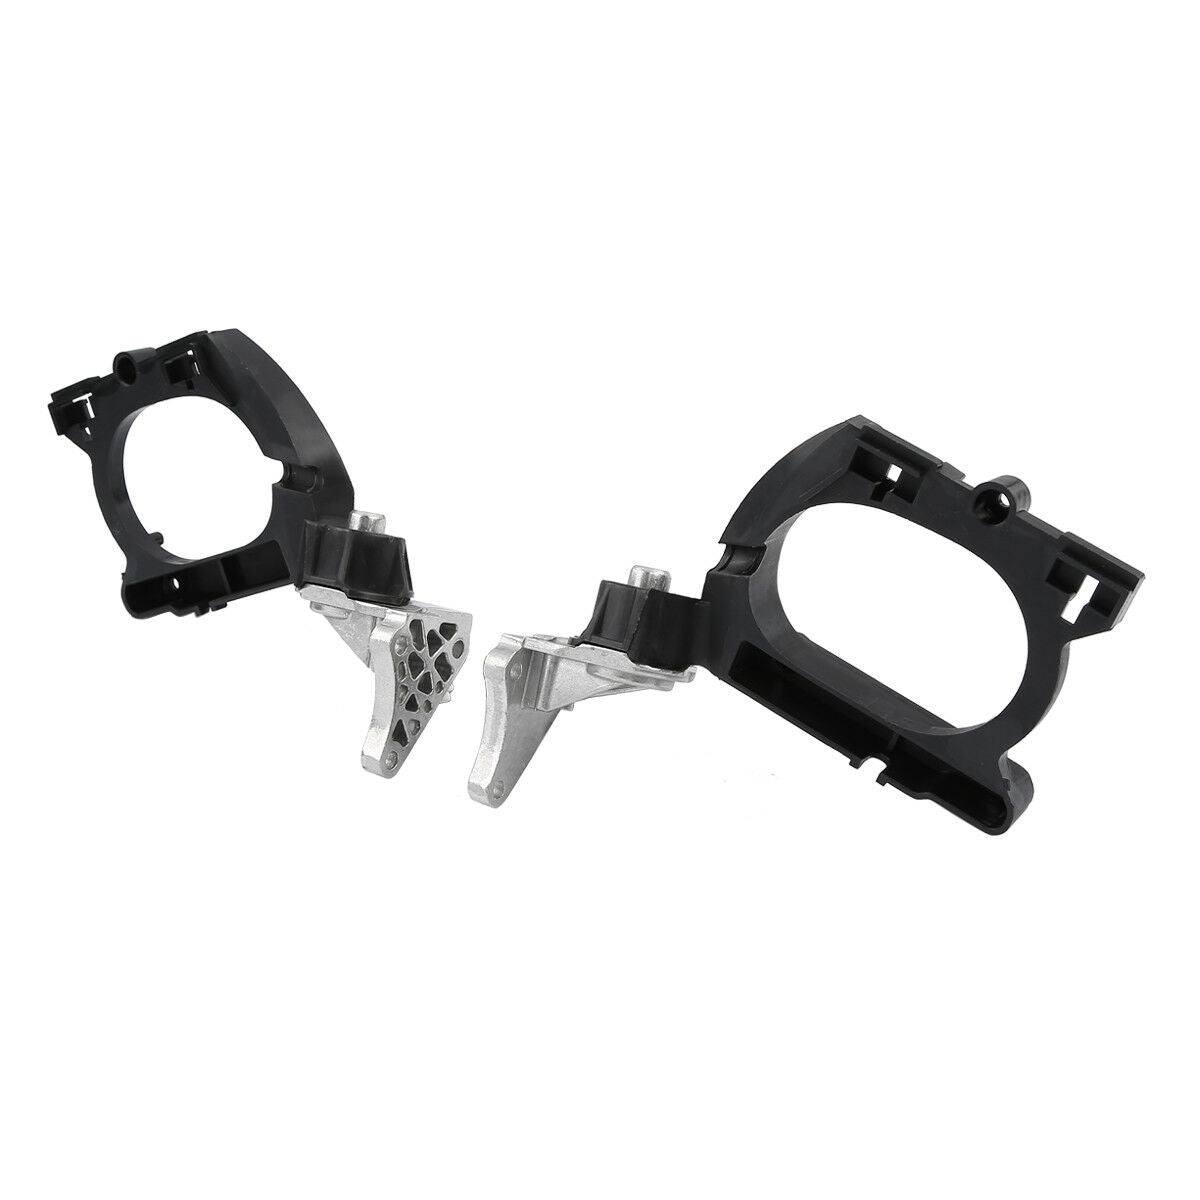 Rear View Mirror Base Mount Bracket For Honda Goldwing GL1800 2001-2013 09 10 11 - Moto Life Products